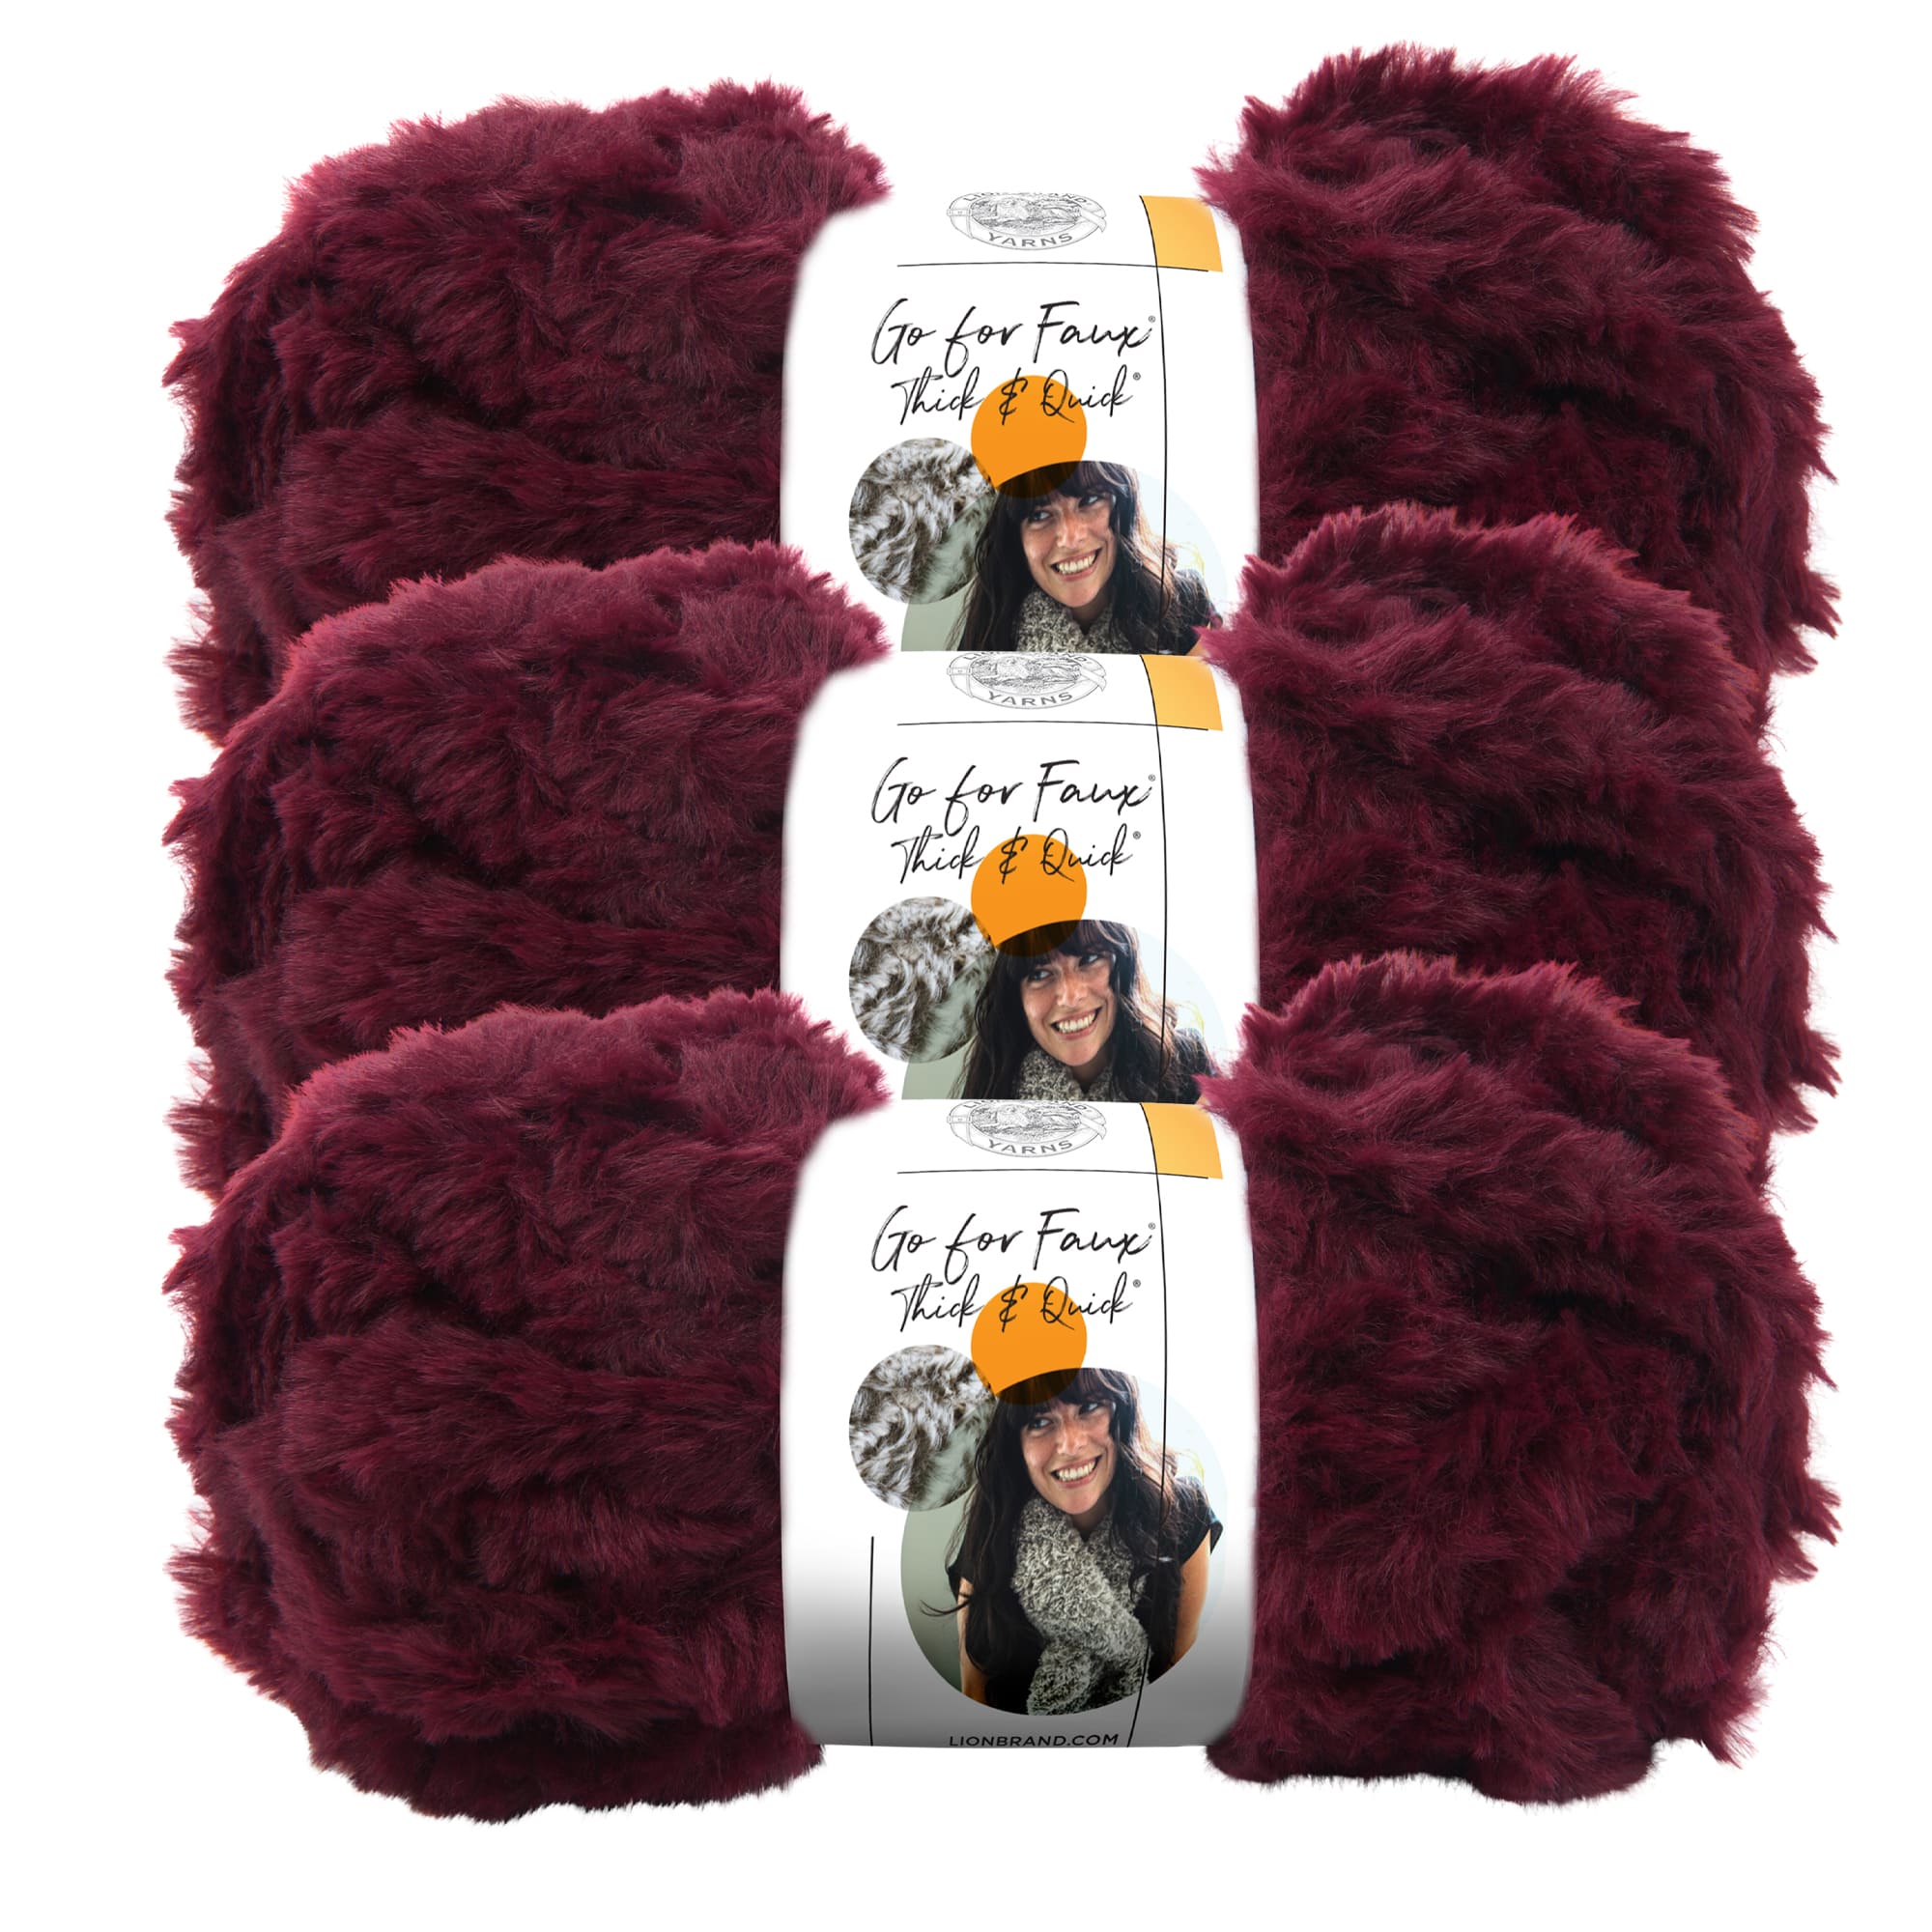 Lion Brand Go for Faux Thick & Quick Yarn - Pack of 3 Skeins (323